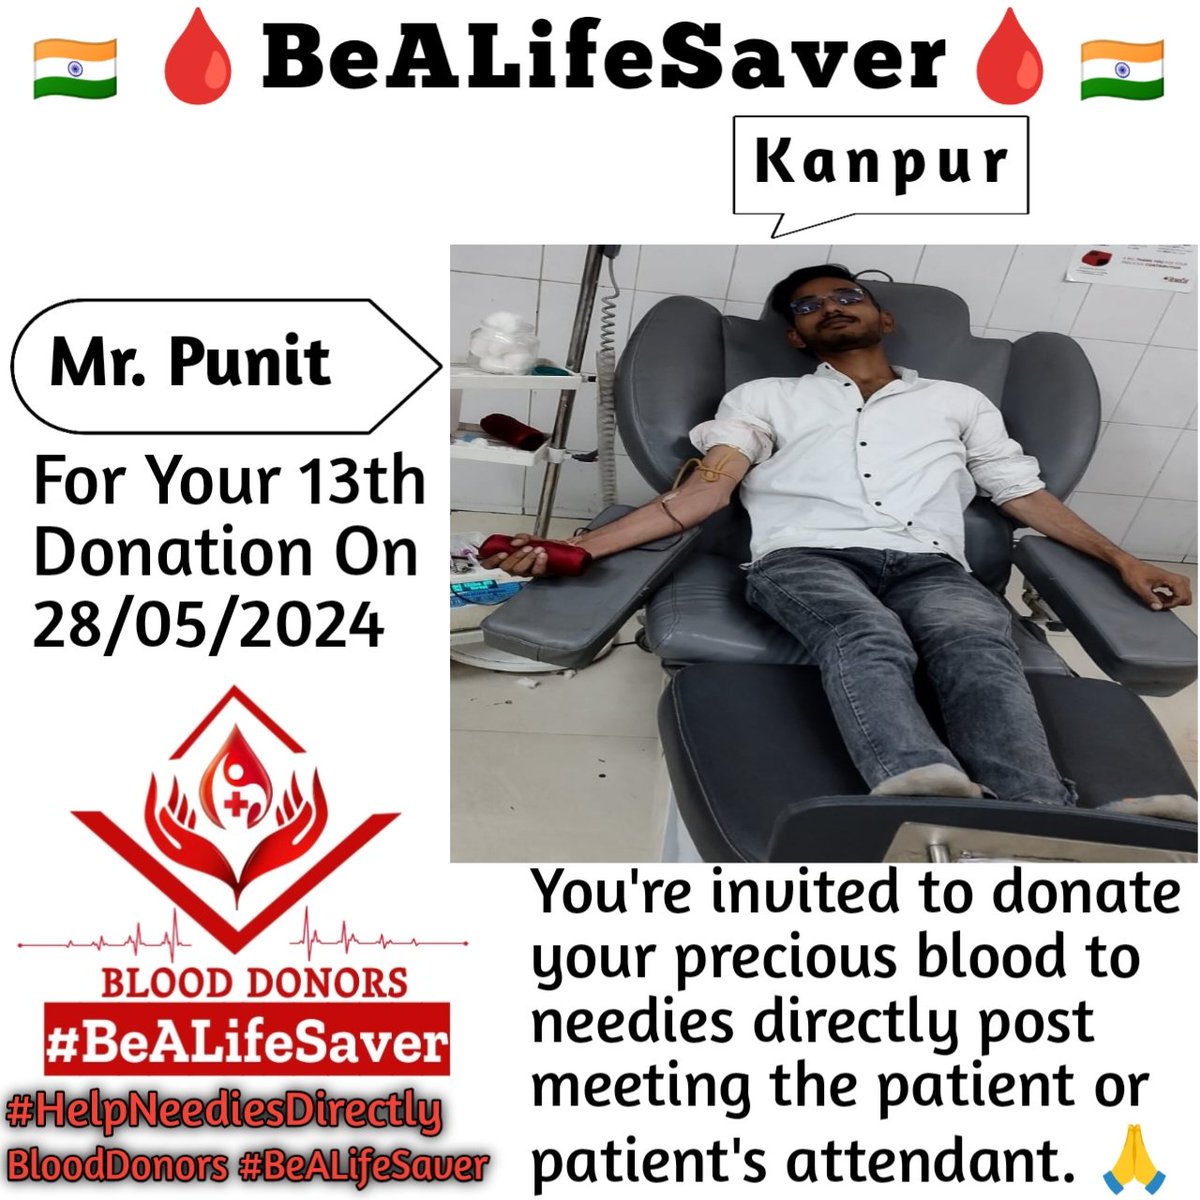 🙏 Congrats To Mr. Punit Ji For His 13th Blood Donation 🙏 #HelpNeediesDirectly #BeALifeSaver Today's hero, Mr. Punit Ji, donated blood in Kanpur for the 13th time to help a patient in need. Heartfelt gratitude and respect for his selfless act.